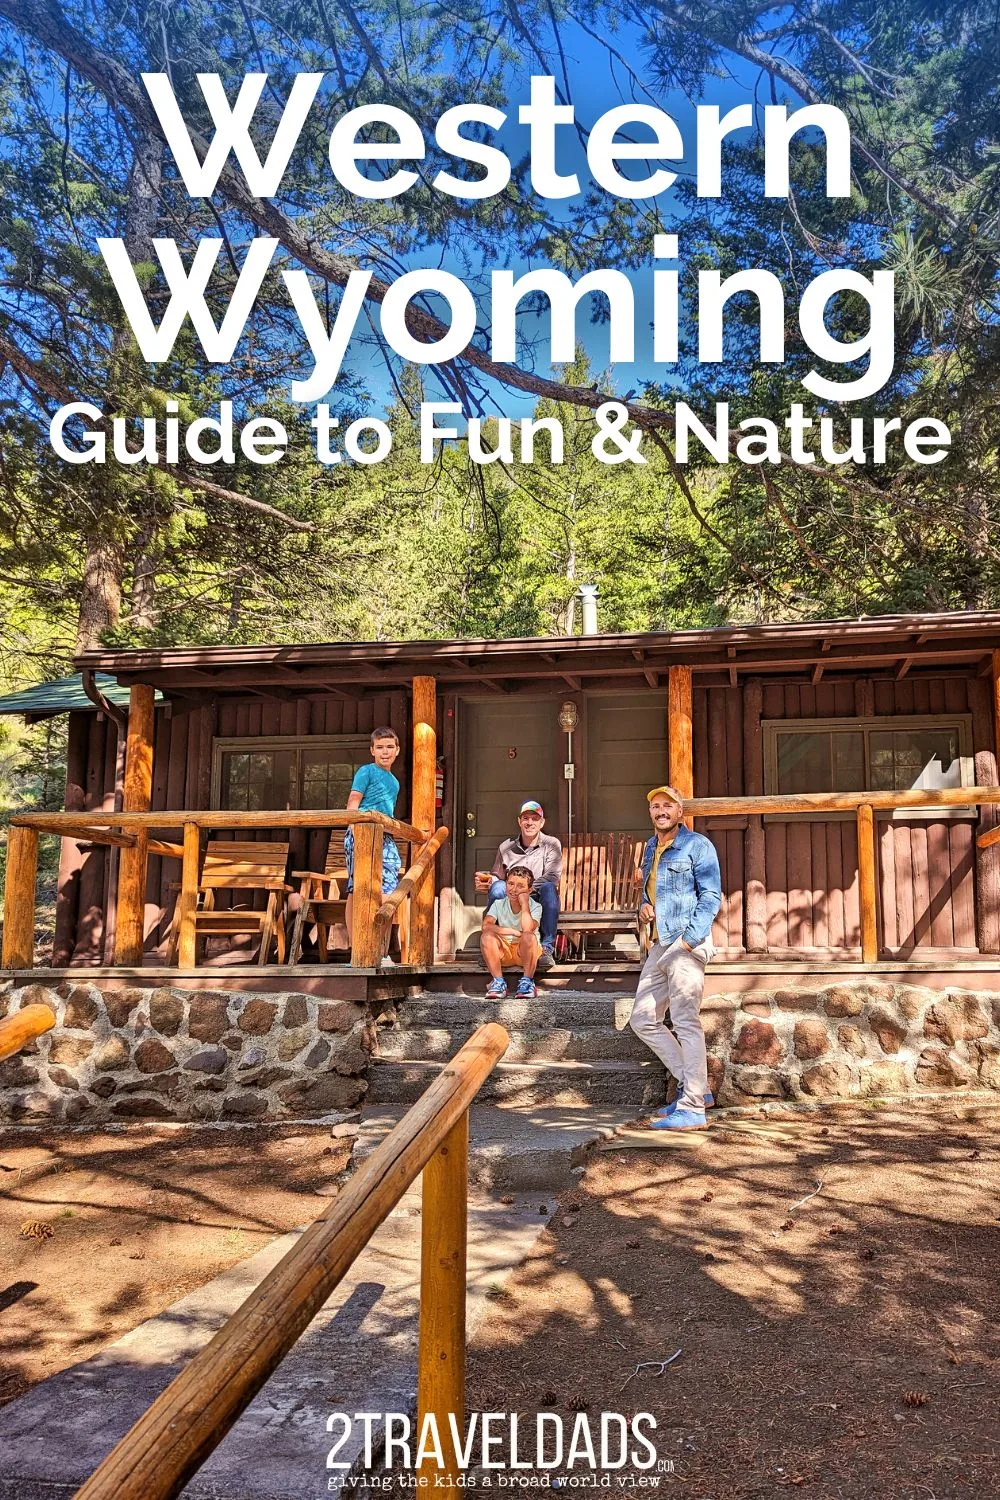 When you want the best of the west you plan a Wyoming vacation. But what does that mean? We've got our top picks for things to do in Wyoming that range from horseback riding to dinosaur fossils and Yellowstone National Park, and it's guaranteed to be a memorable vacation plan.